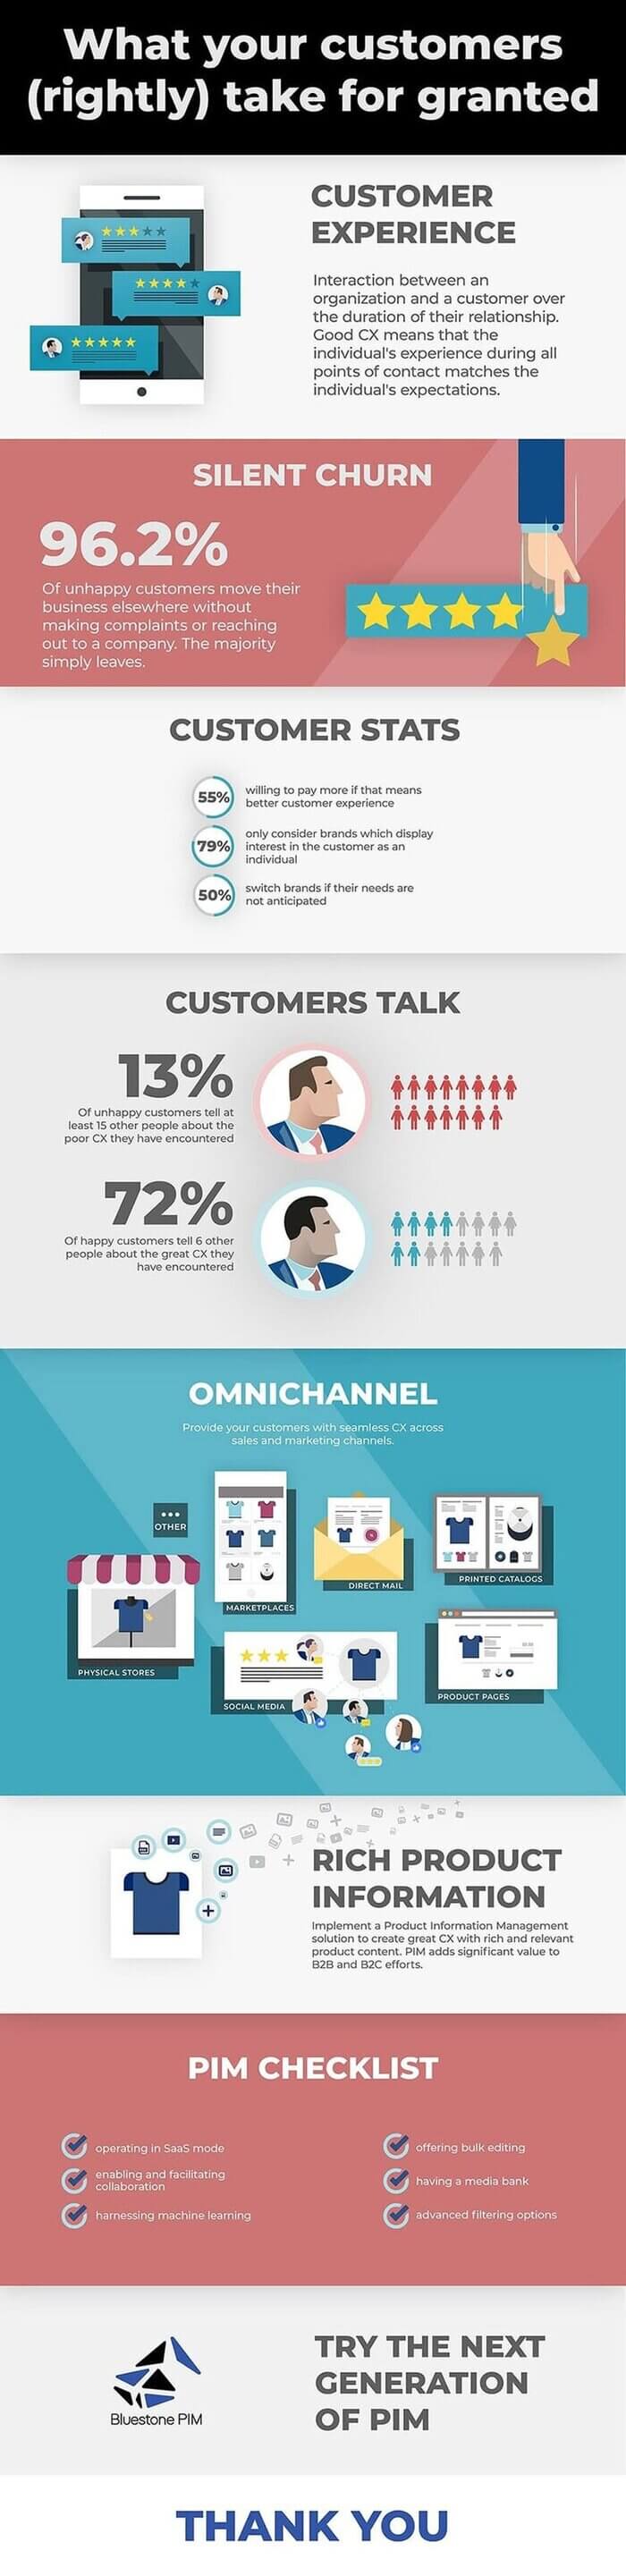 Infographic on Customer Experience, Customer Statistics, Omnichannel Marketing, and Rich Product Information